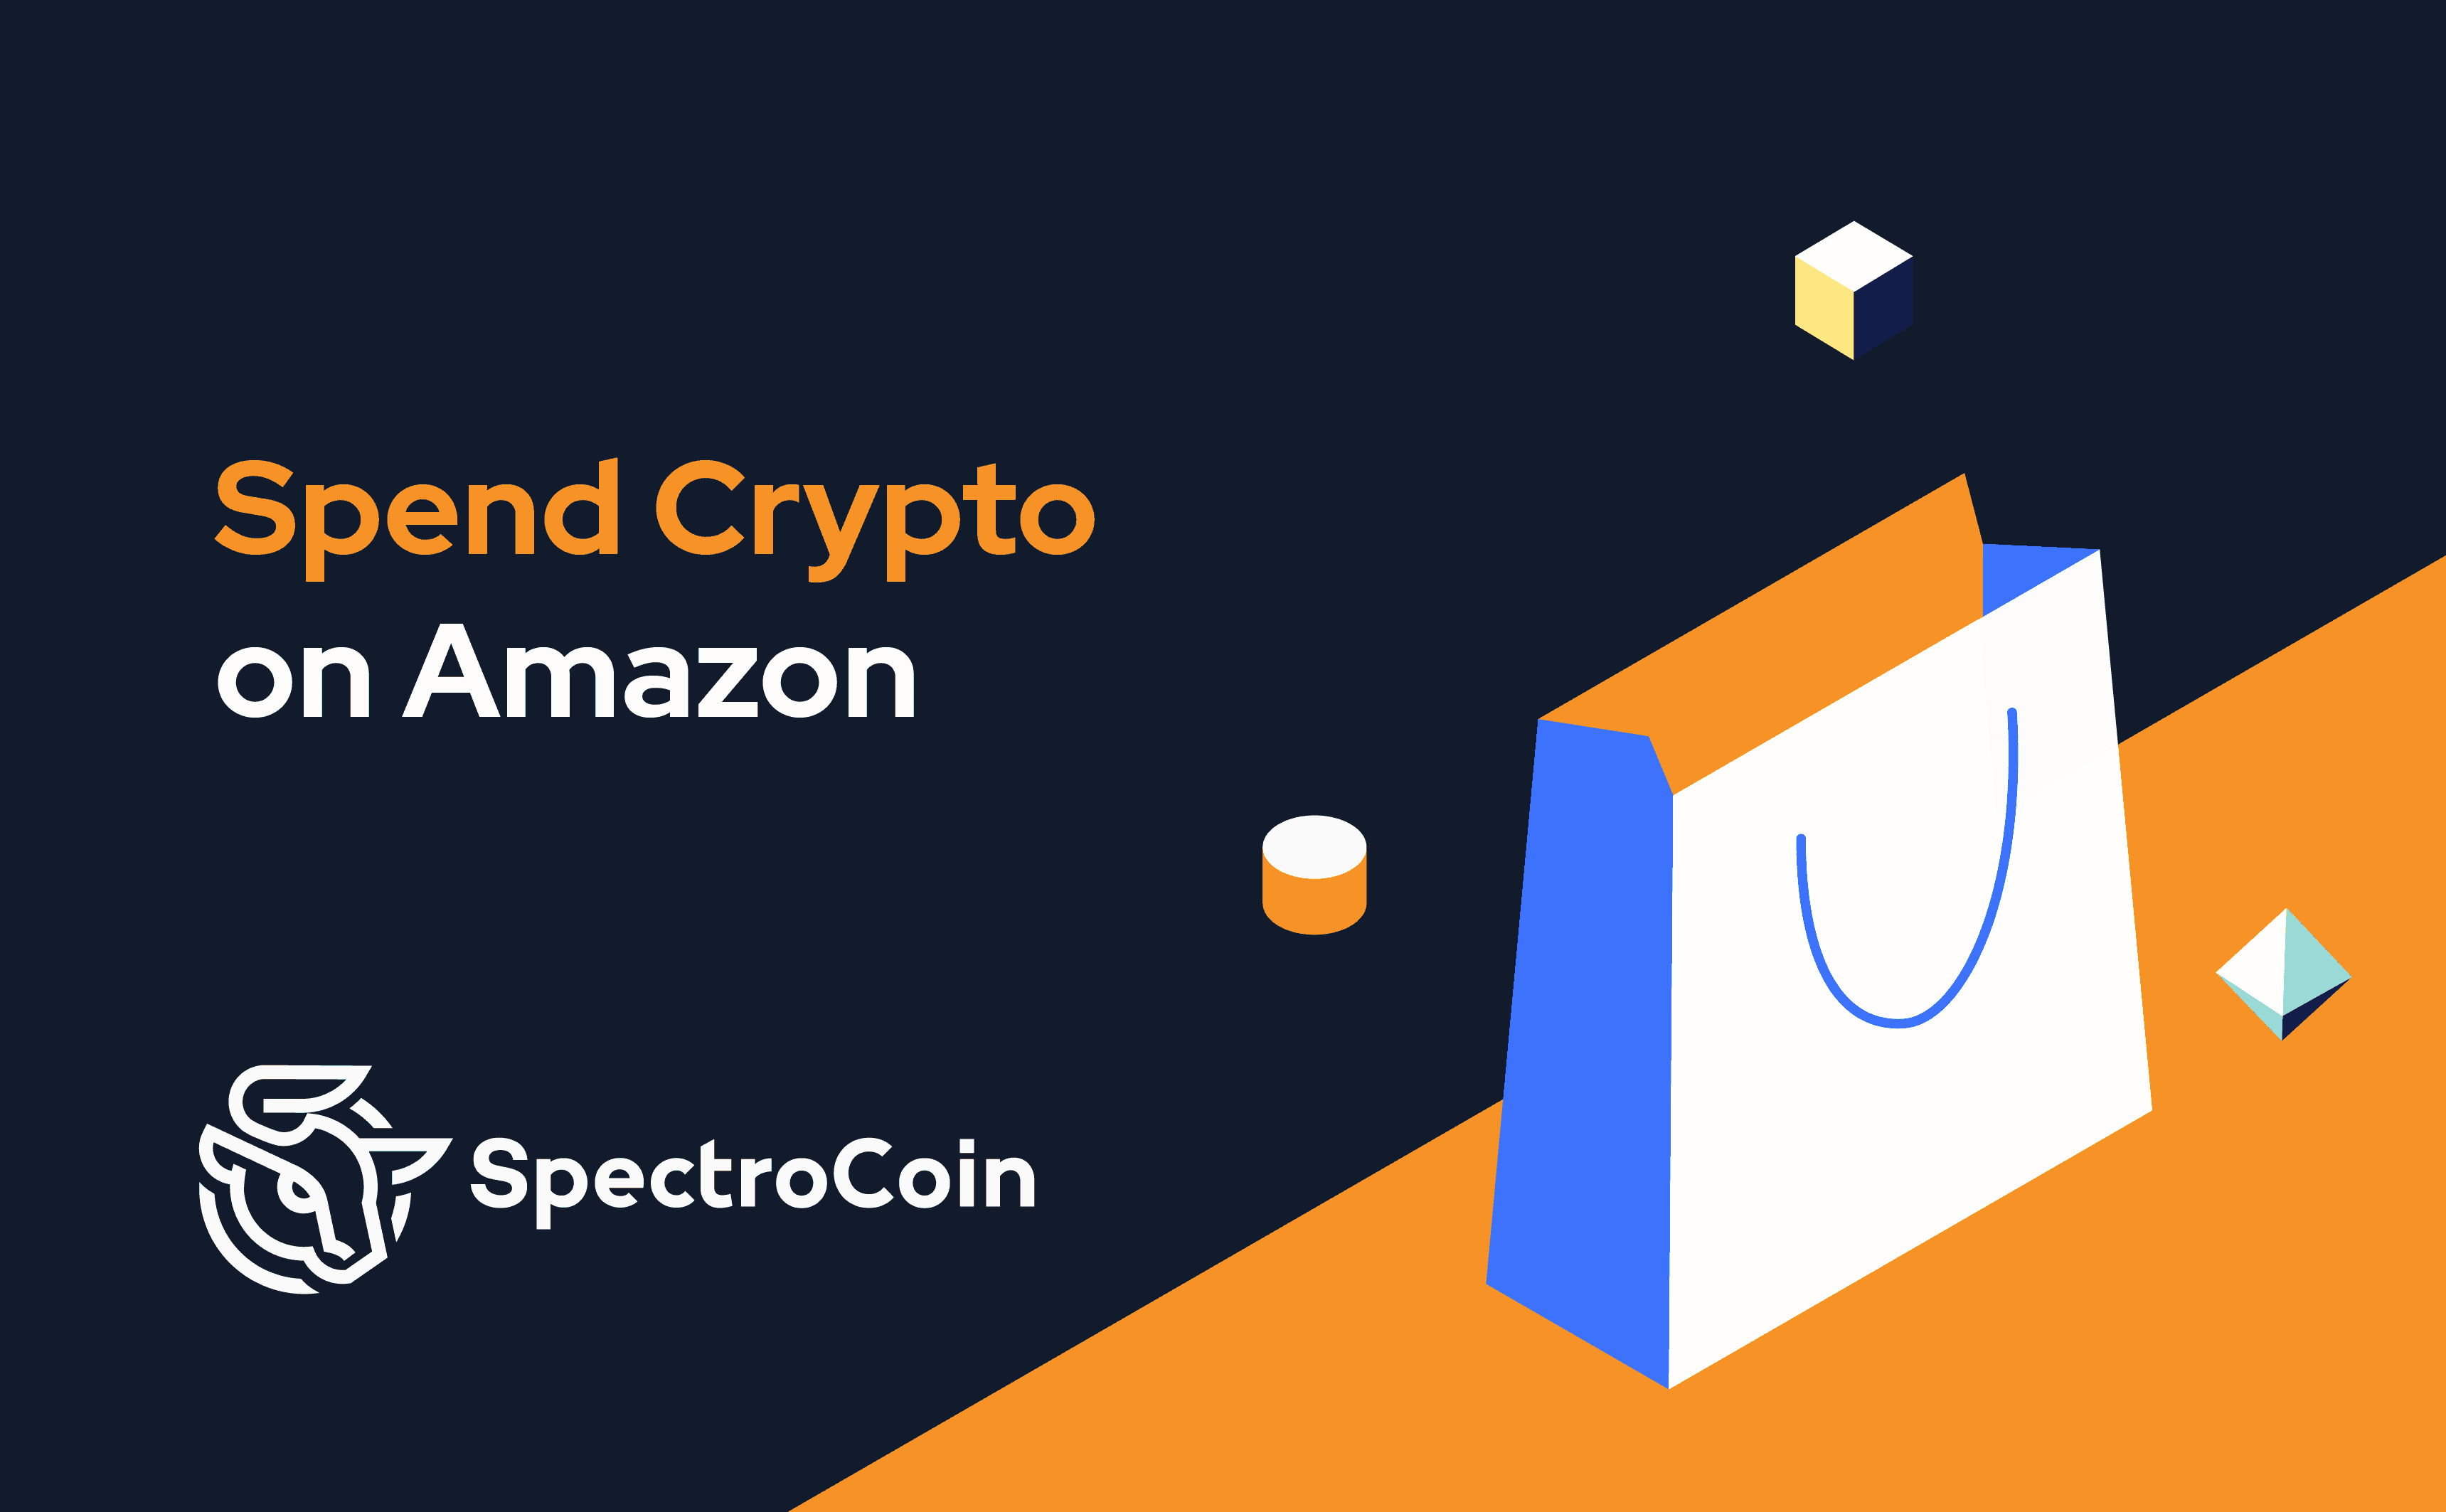 Spend Bitcoin on Amazon with SpectroCoin. Feature is also available for other cryptocurrencies.